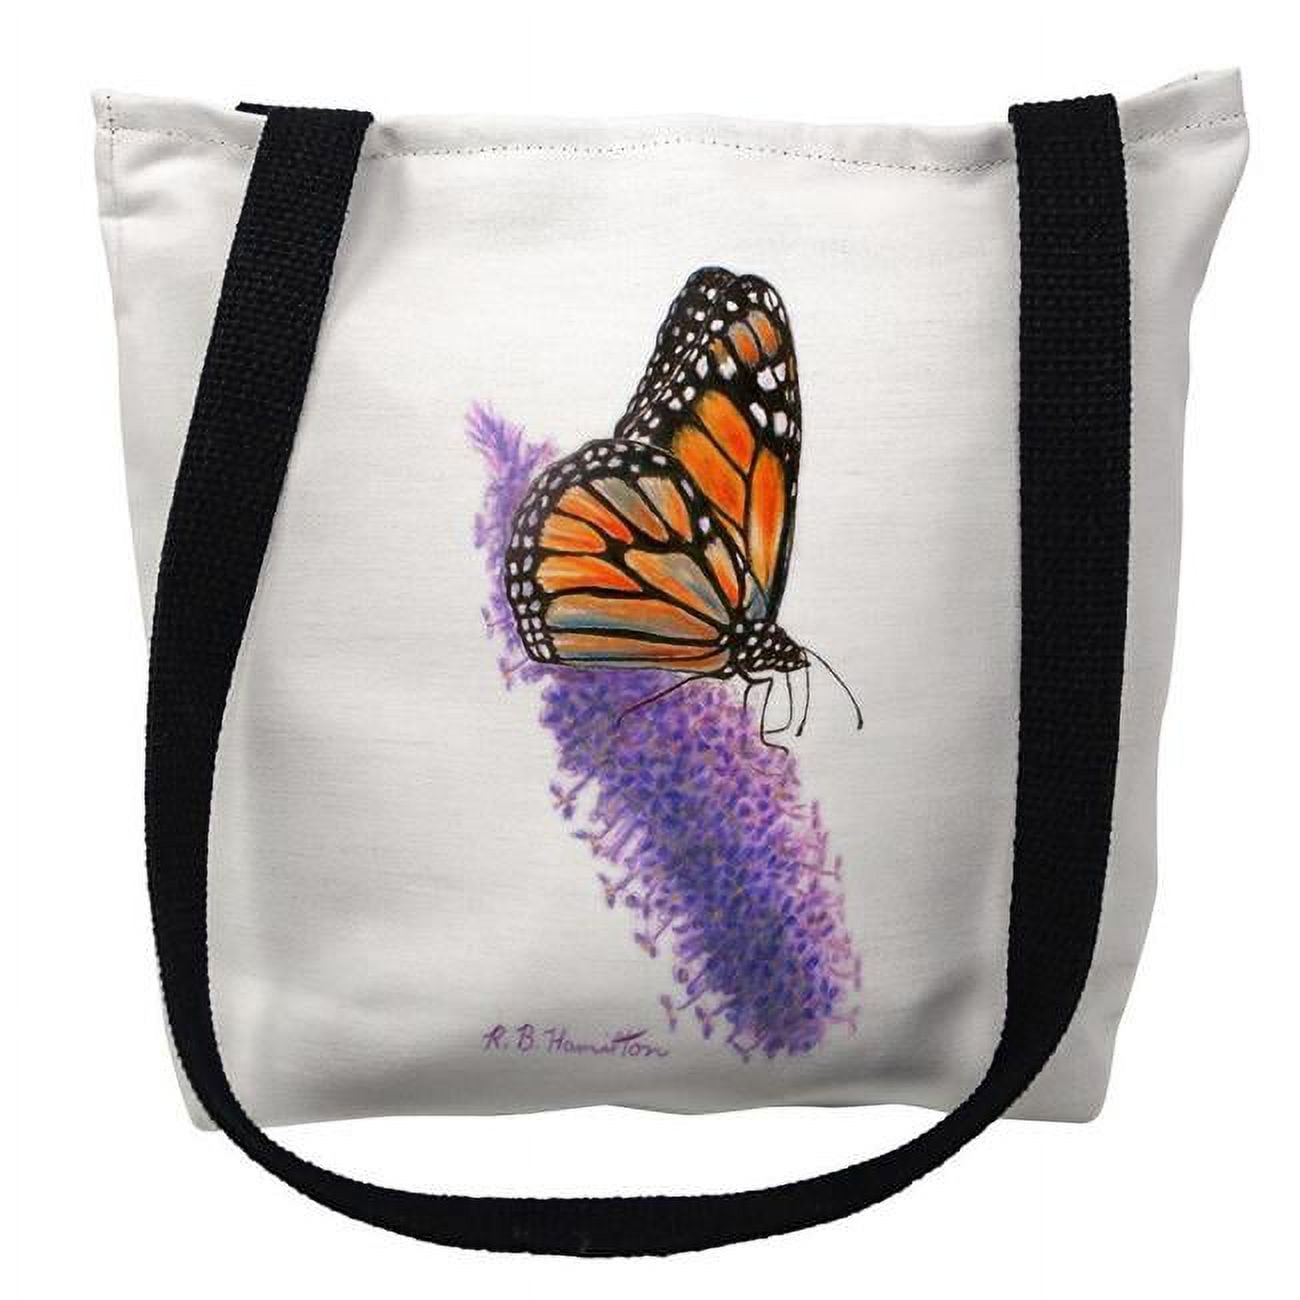 Ty046m 16 X 16 In. Monarch Butterfly Tote Bag - Medium